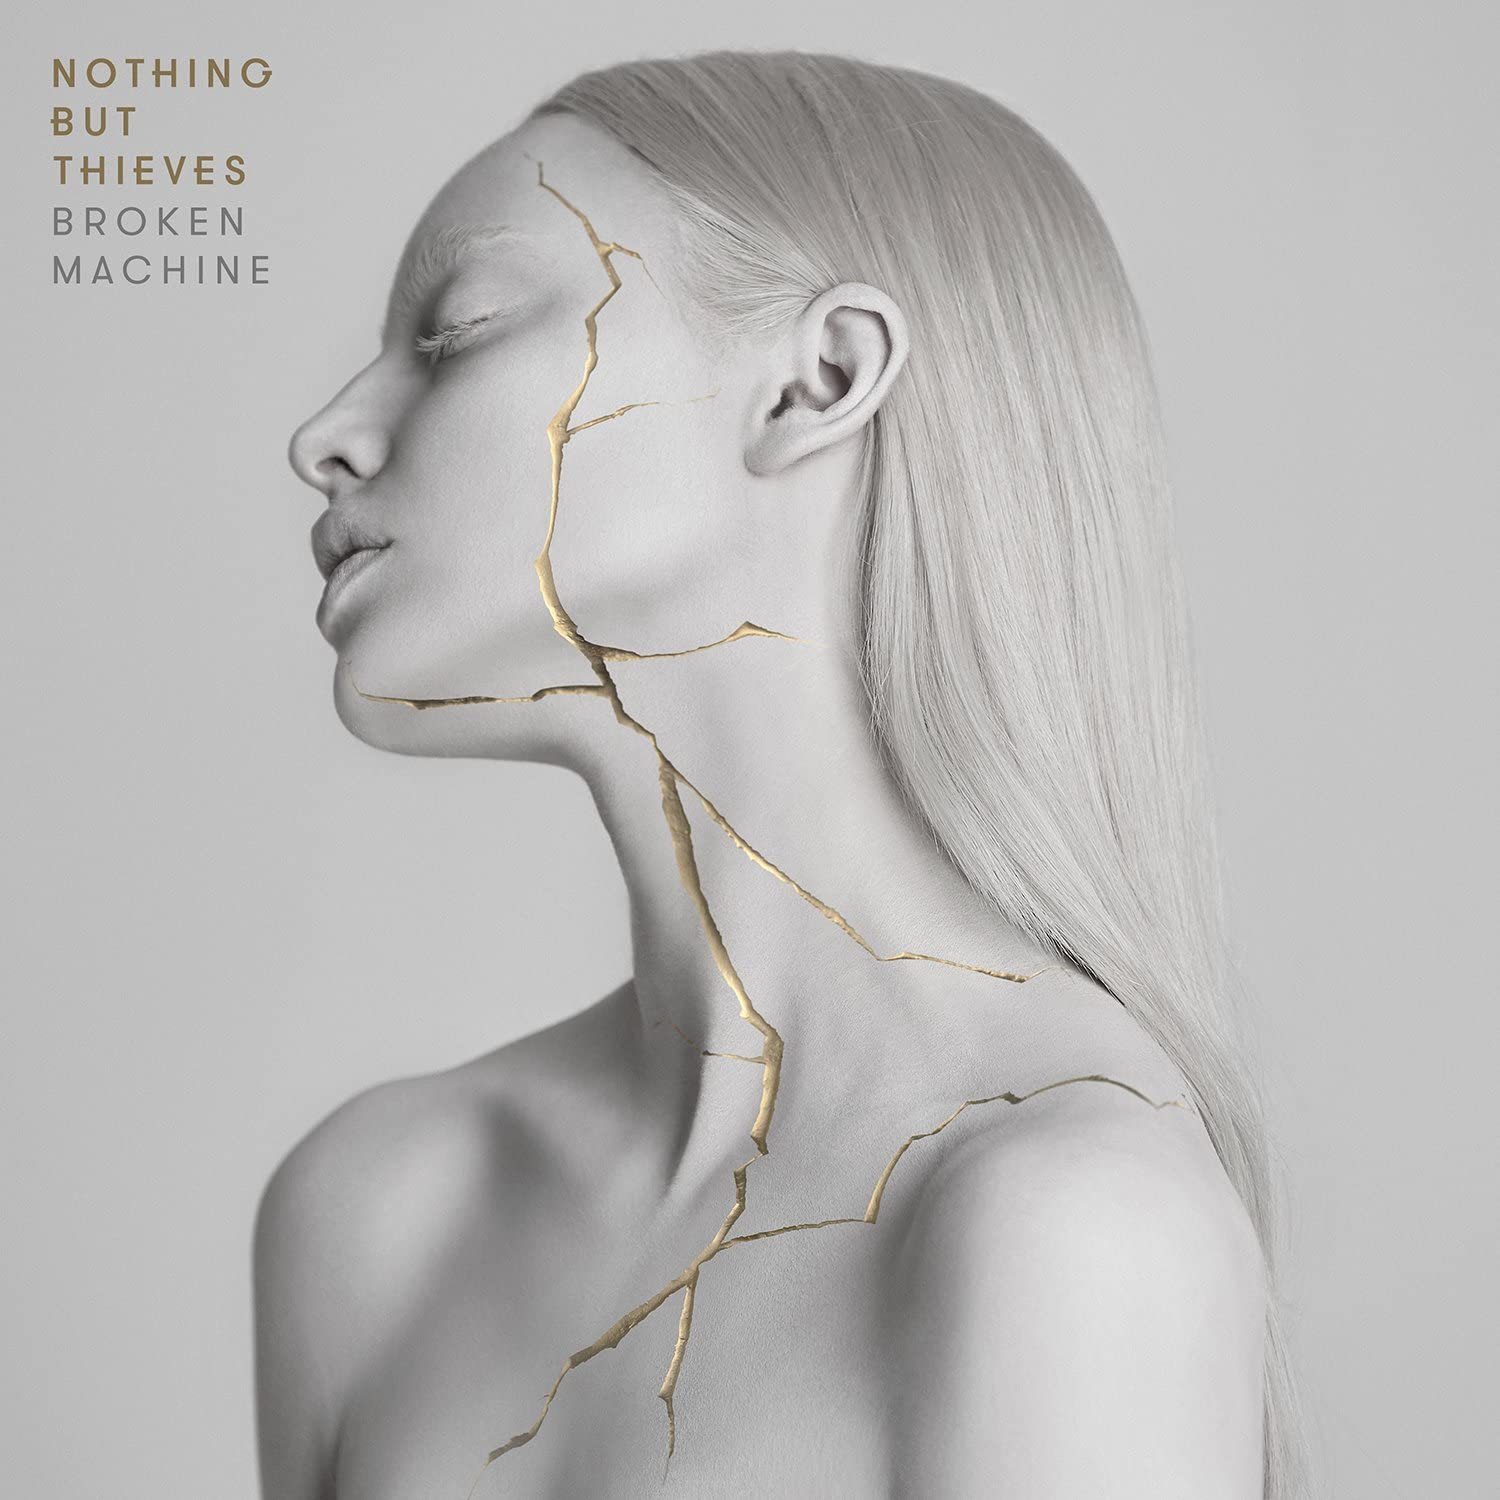 Album cover of Broken Machine by Nothing But Thieves